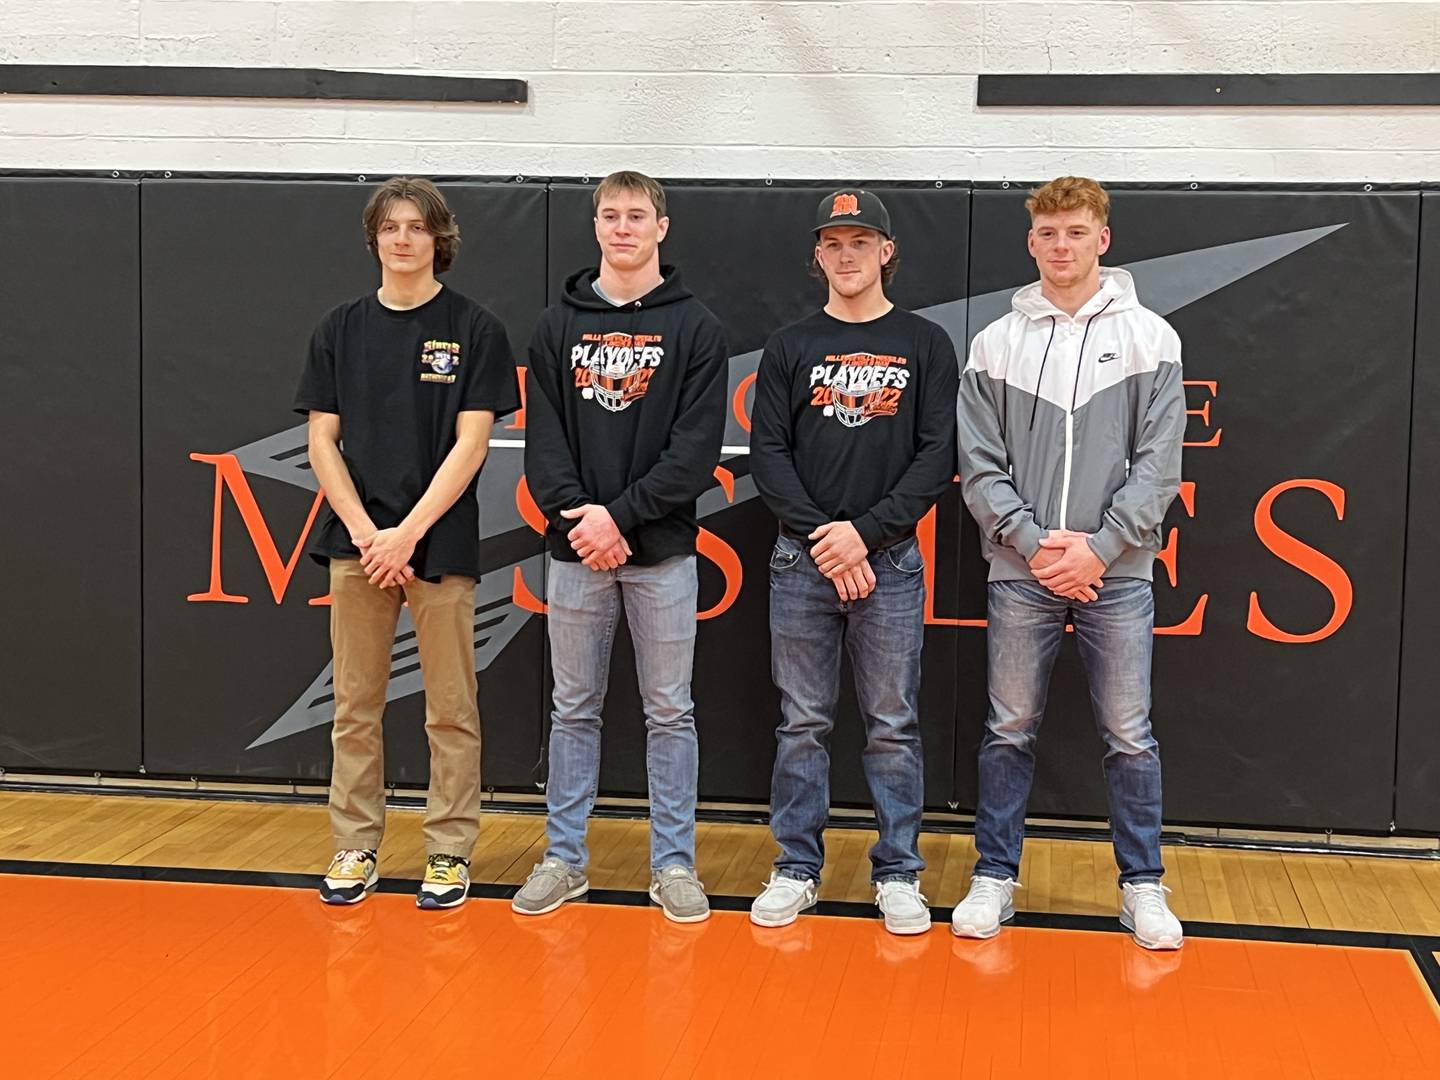 8-Man All State Football selections for Milledgeville were: Kacen Johnson, Kolton Wilk, Eric Ebersole, and Connor Nye.